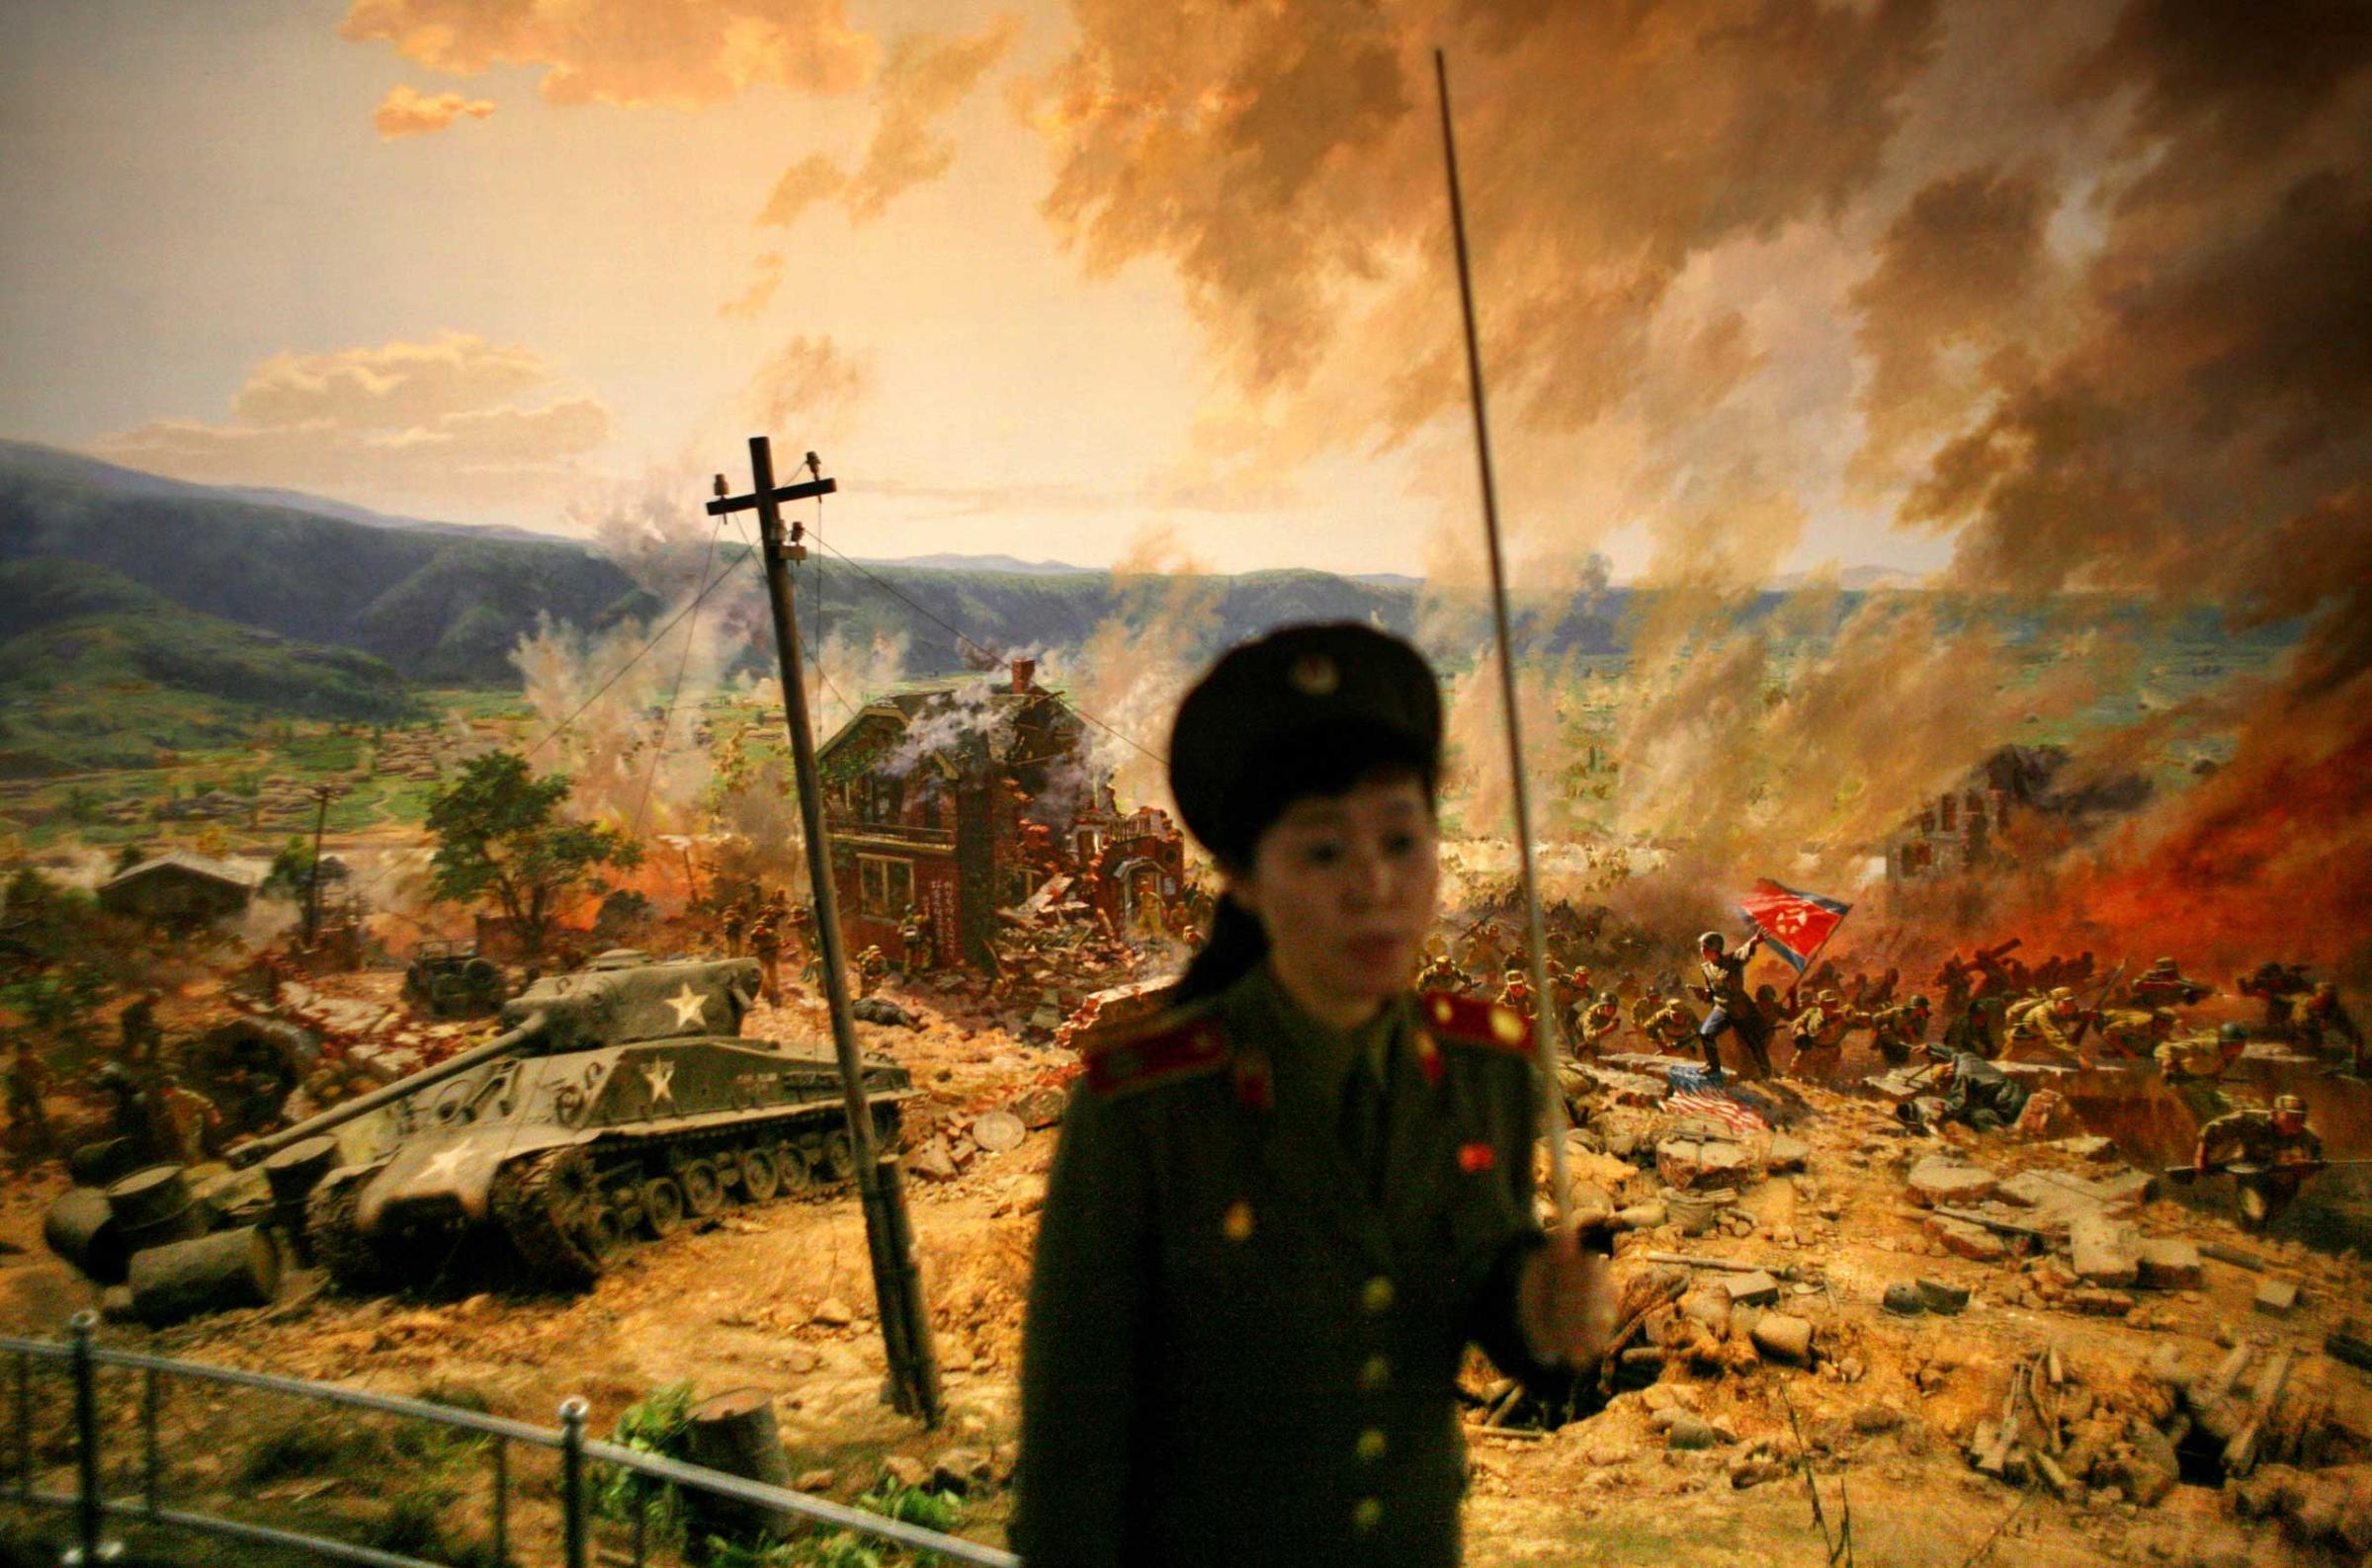 Sept. 16, 2008. A guide gives a lecture in front of a diorama showing the Korean War's 1950 battle of Taejon as she gives a tour of the War Museum in Pyongyang.